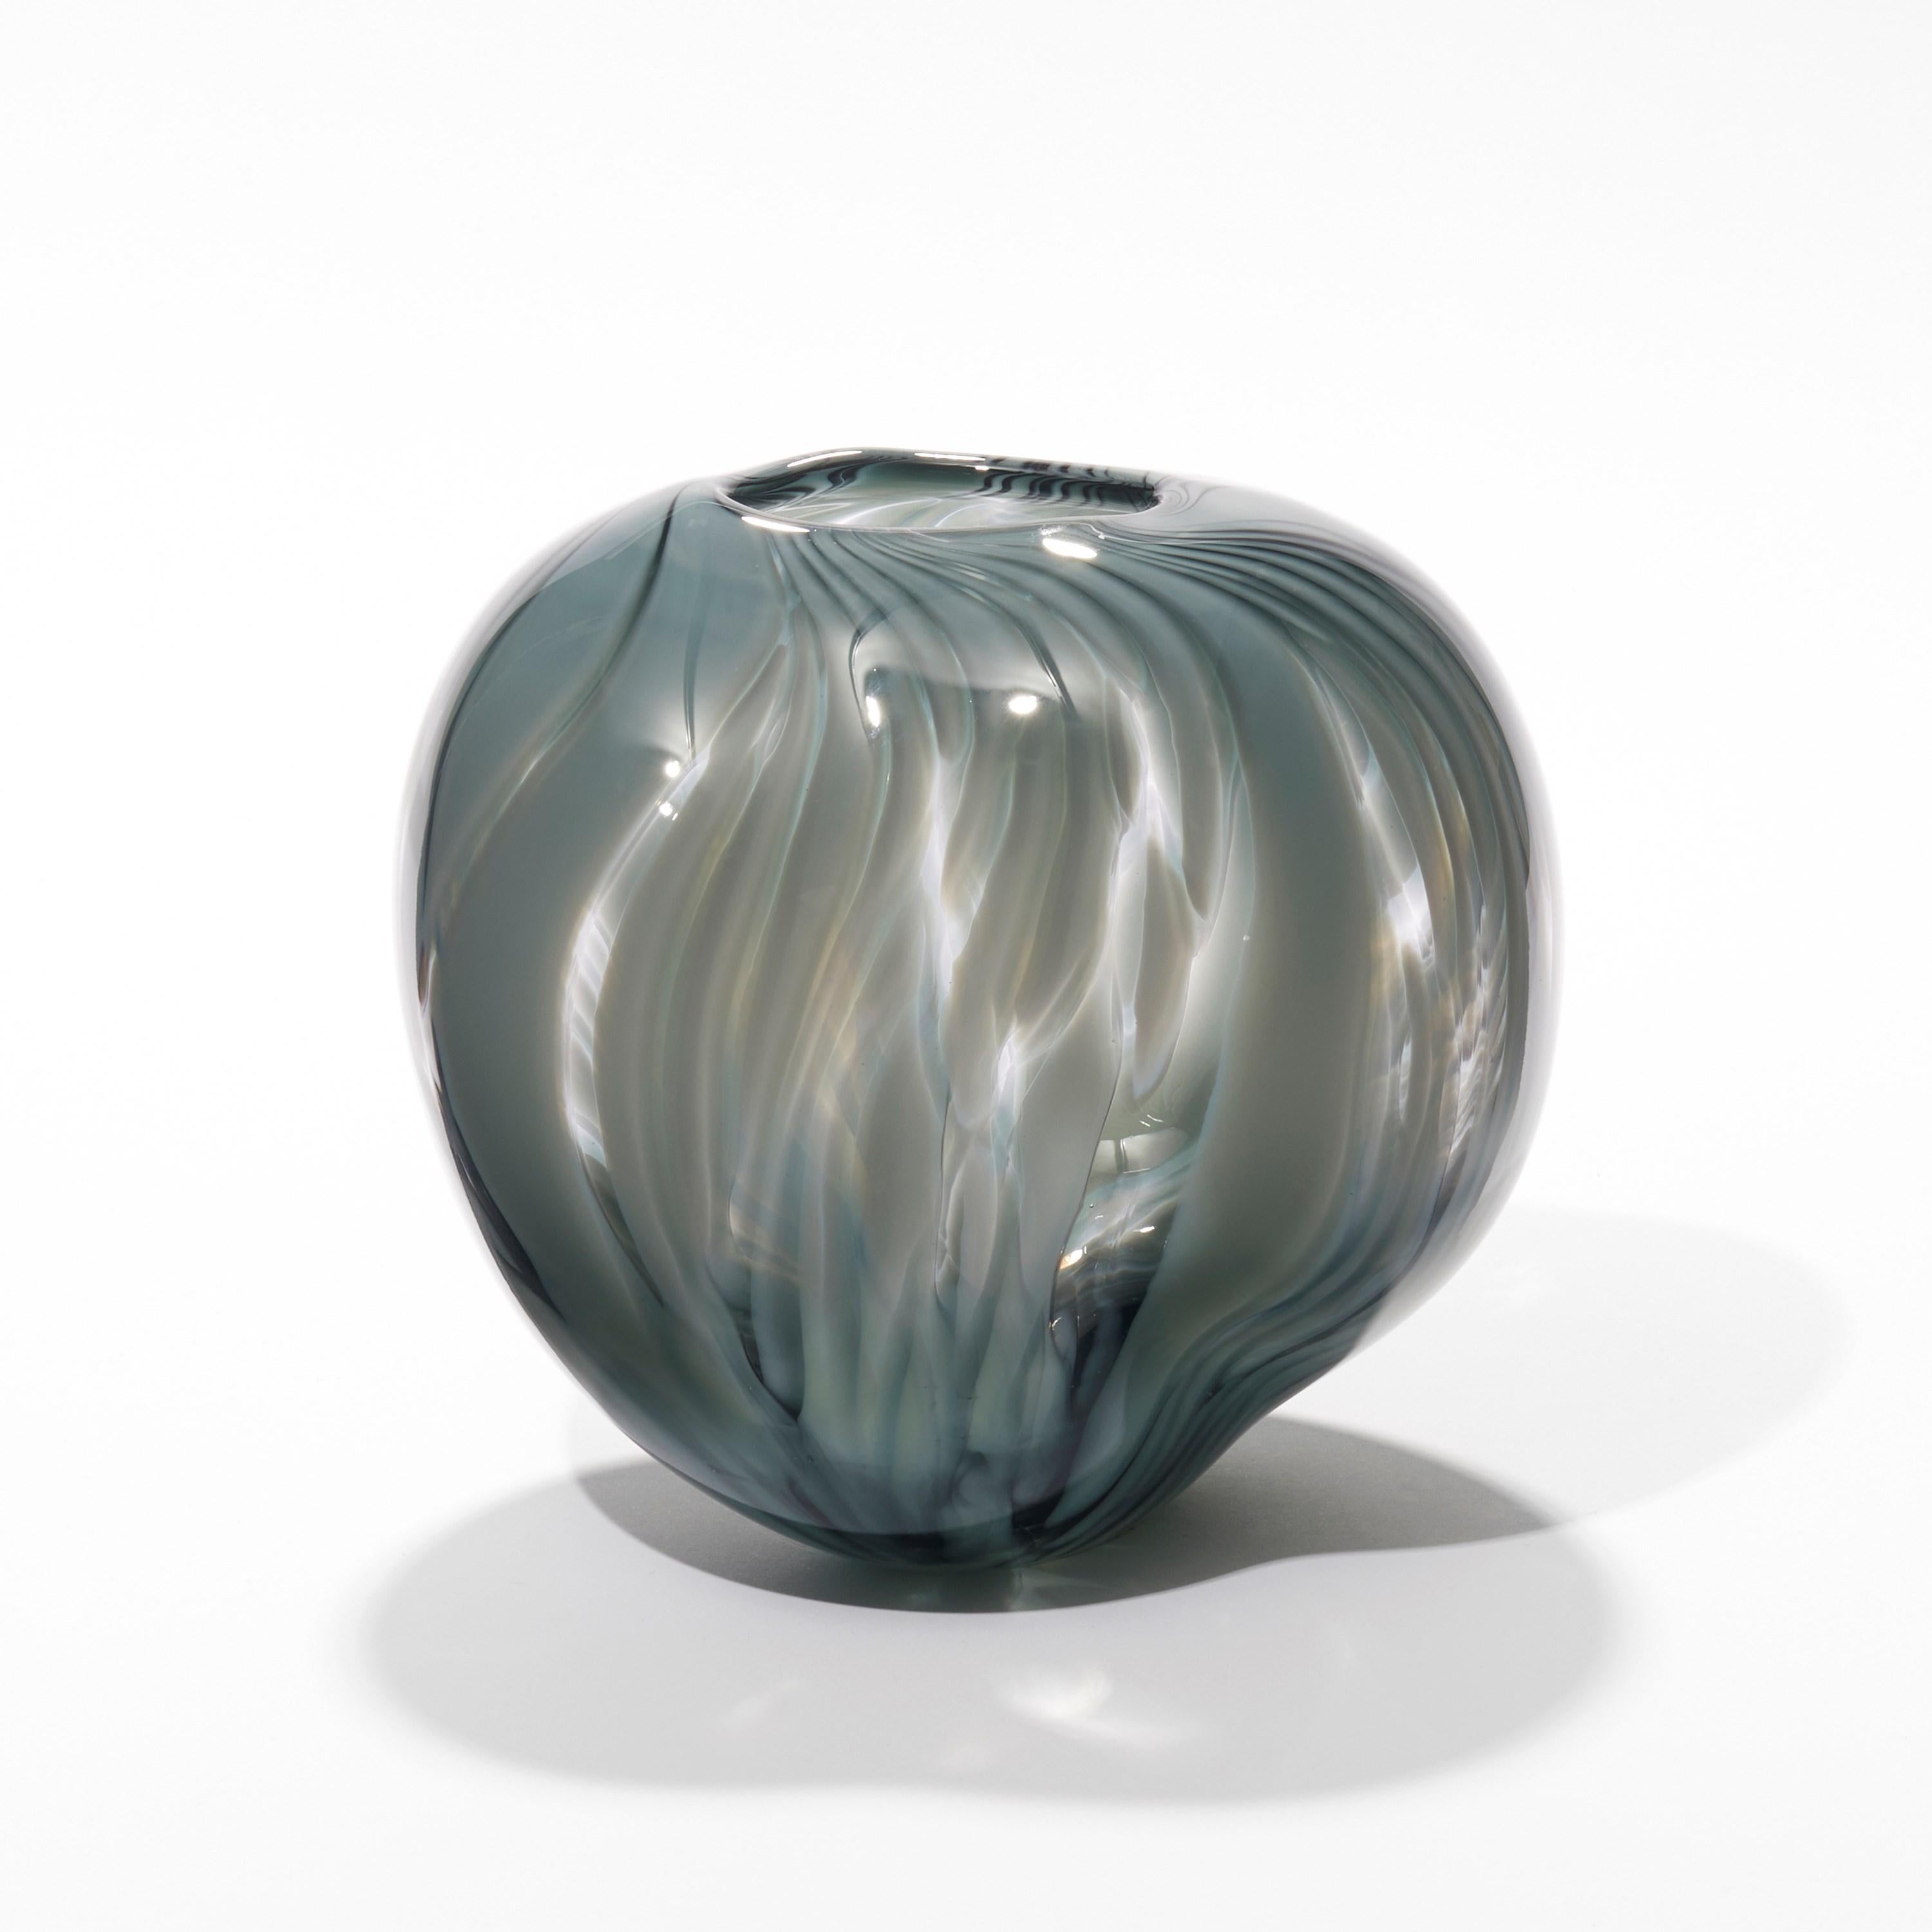 'Tulip Bud' is a unique glass artwork by the Canadian artist, Michèle Oberdieck.

Michèle Oberdieck explores balance and asymmetry through colour, form and surface decoration. Presenting her sculptural works as a gesture, an expressive mark, often